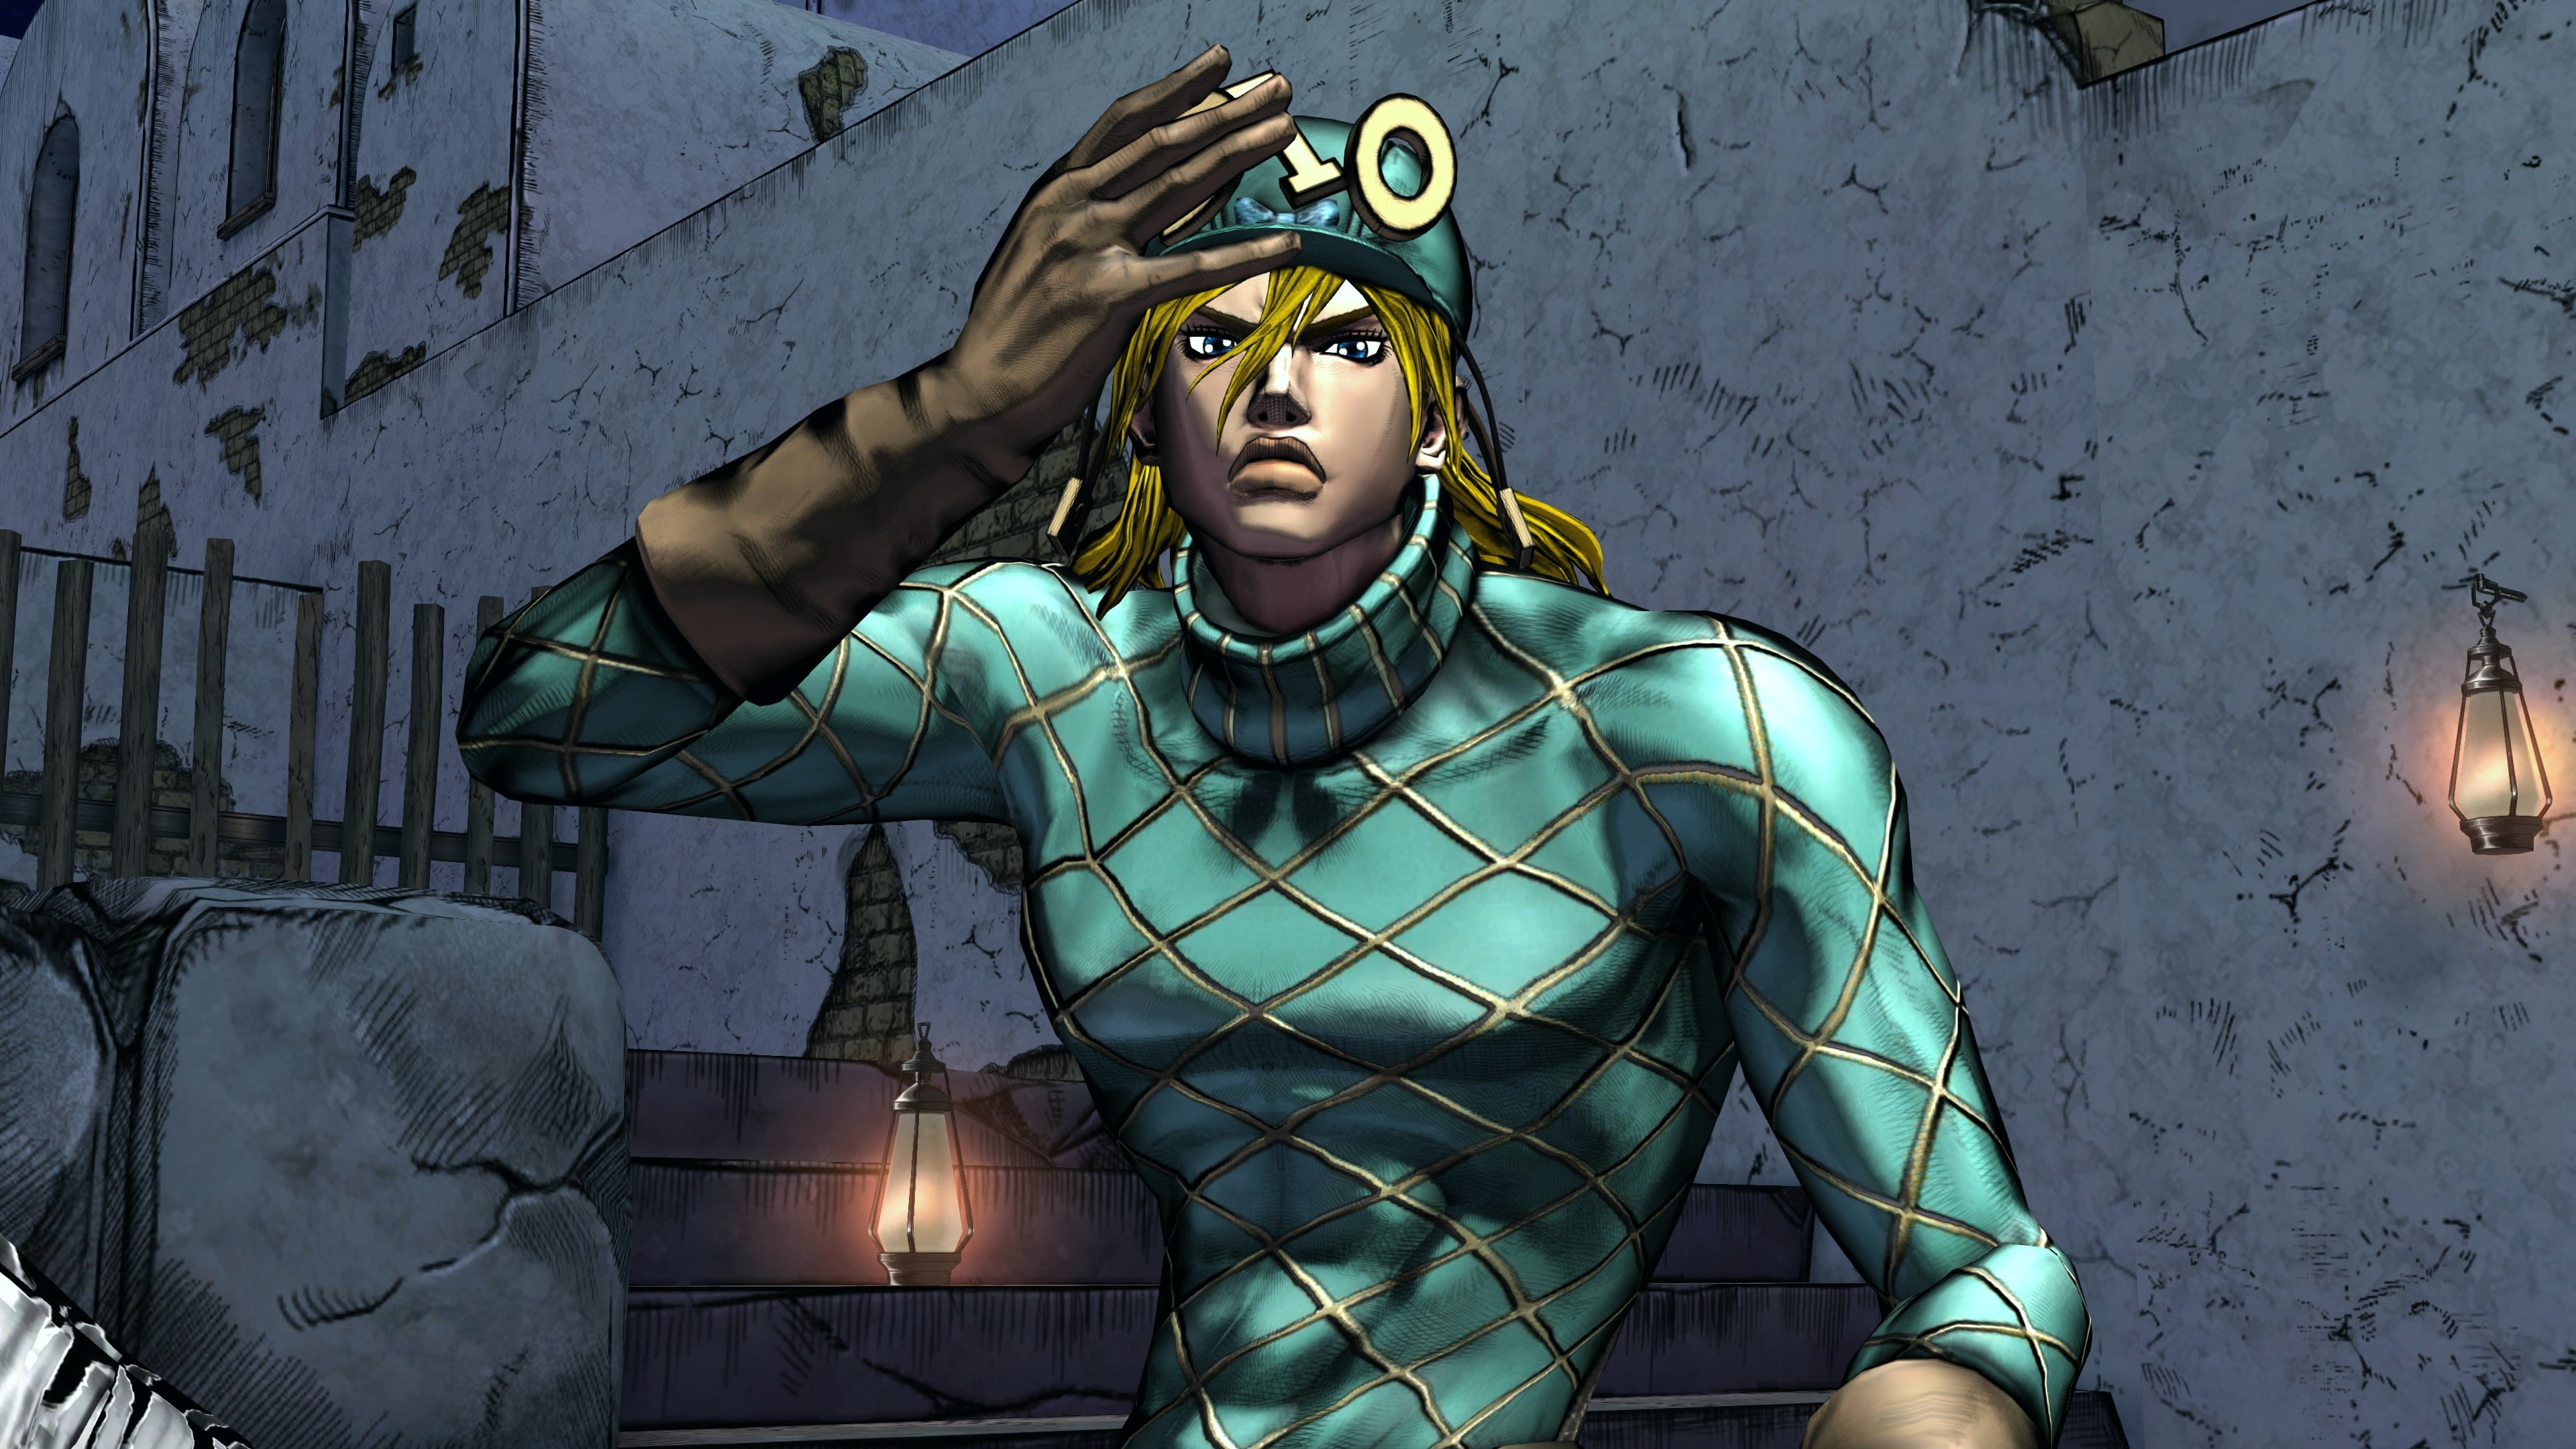 Jojo's All-Star Battle R review — My stand will be the judge